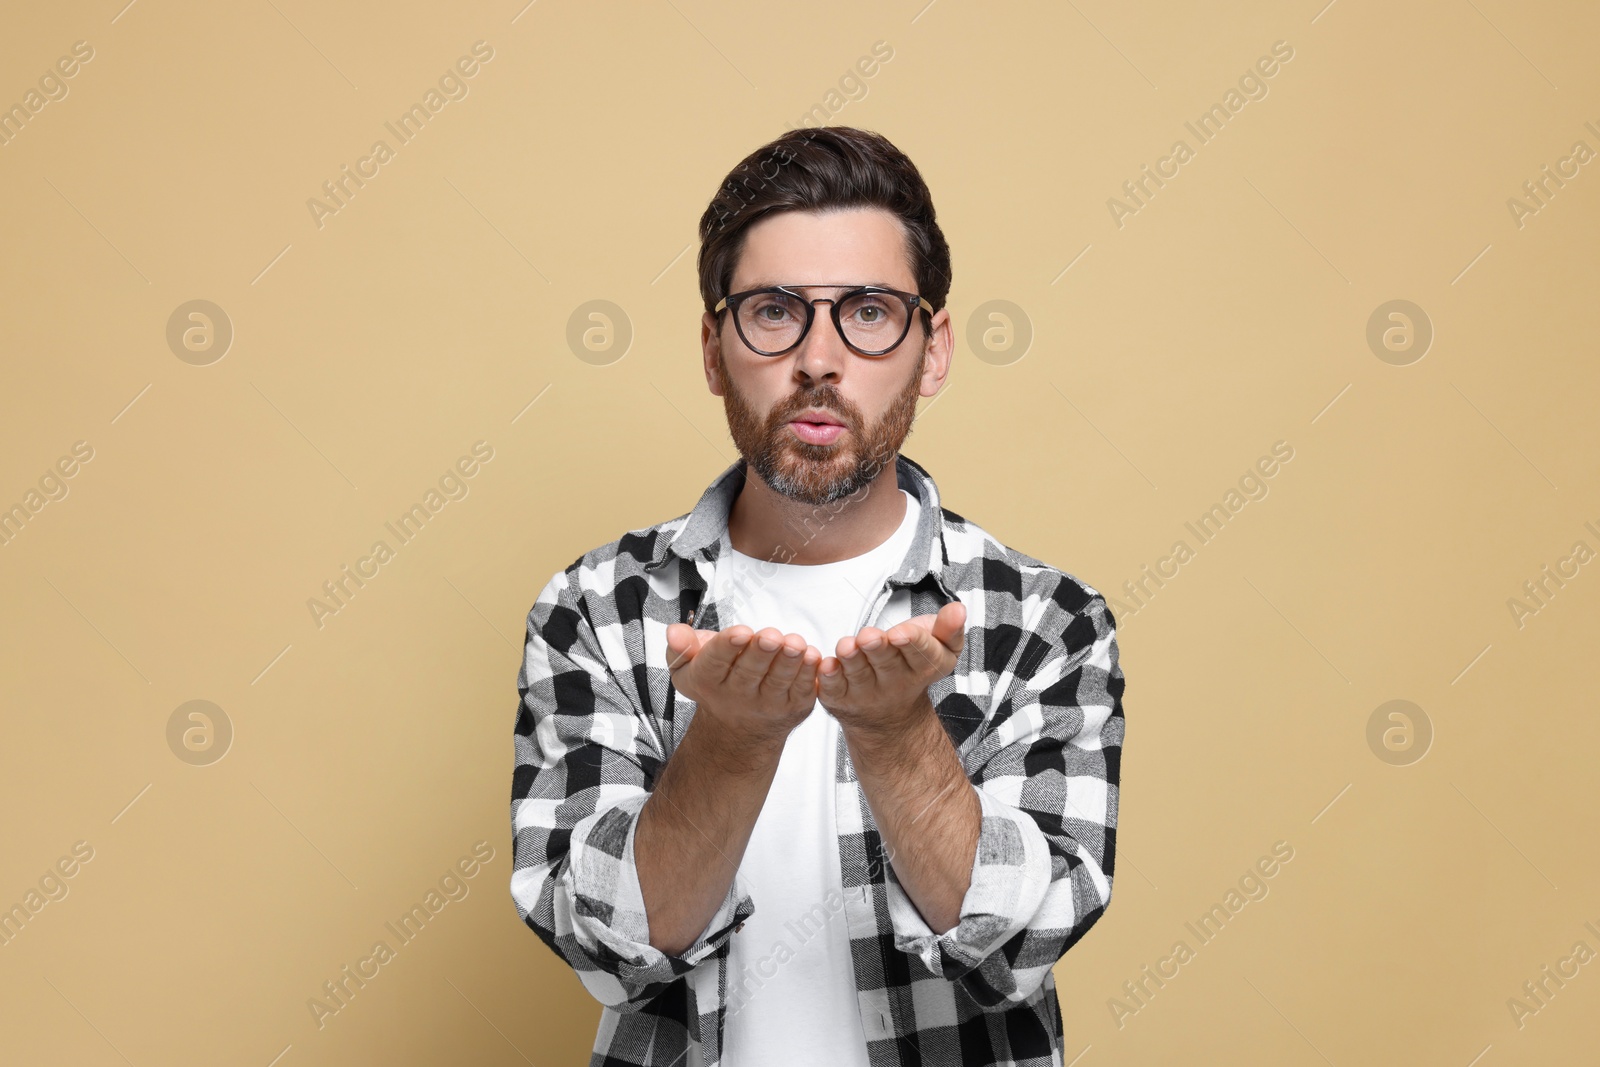 Photo of Handsome man blowing kiss on beige background